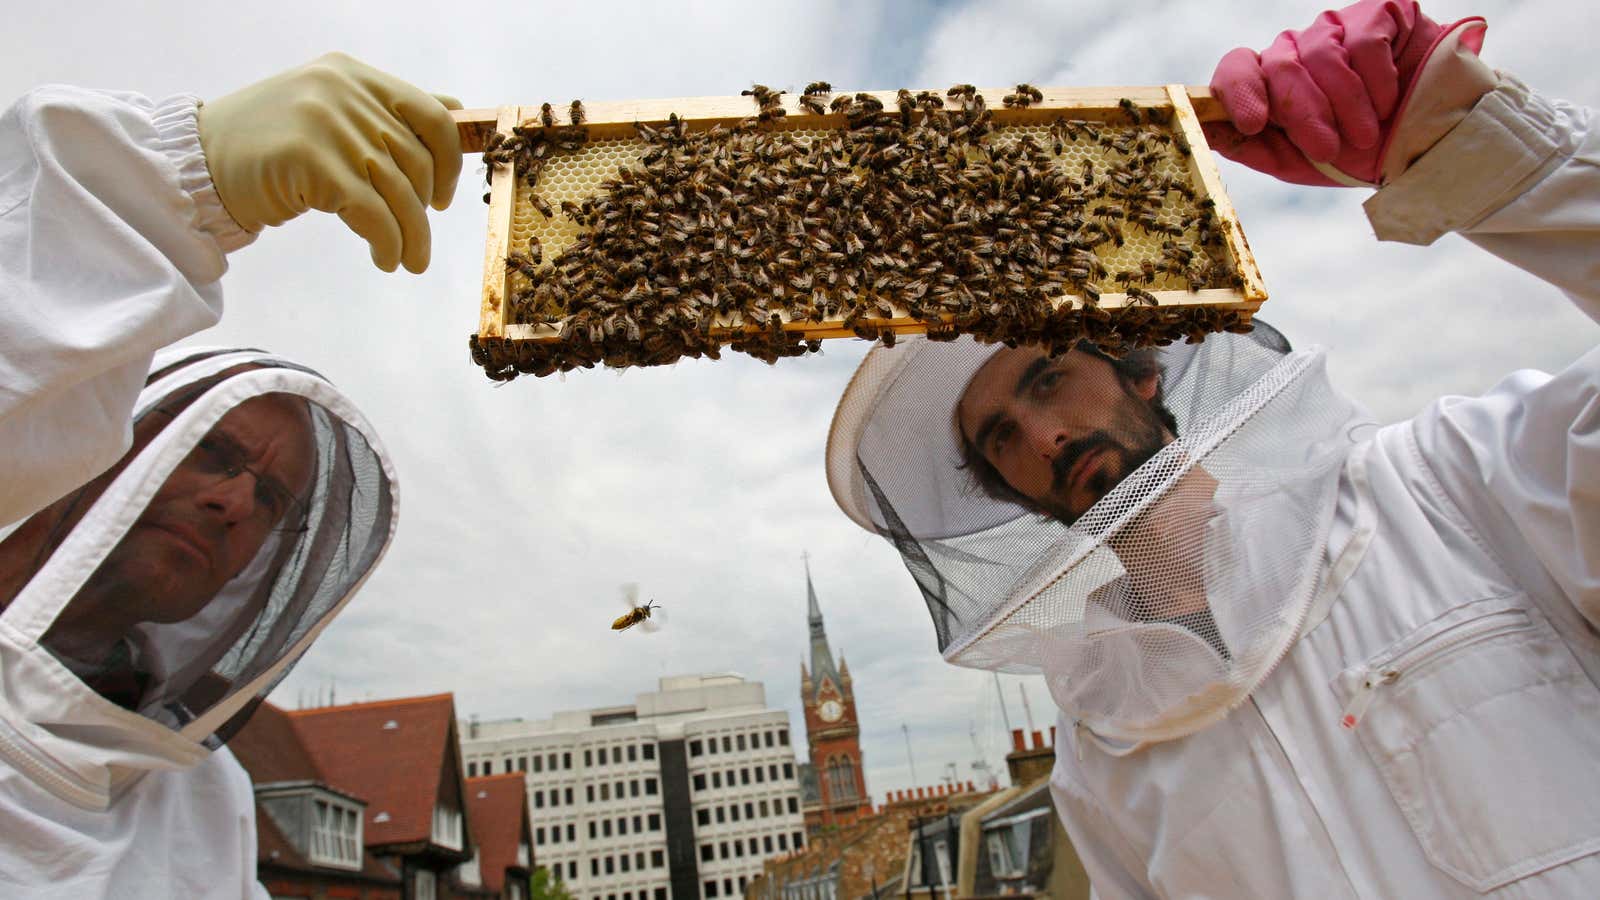 No sick days for bees.